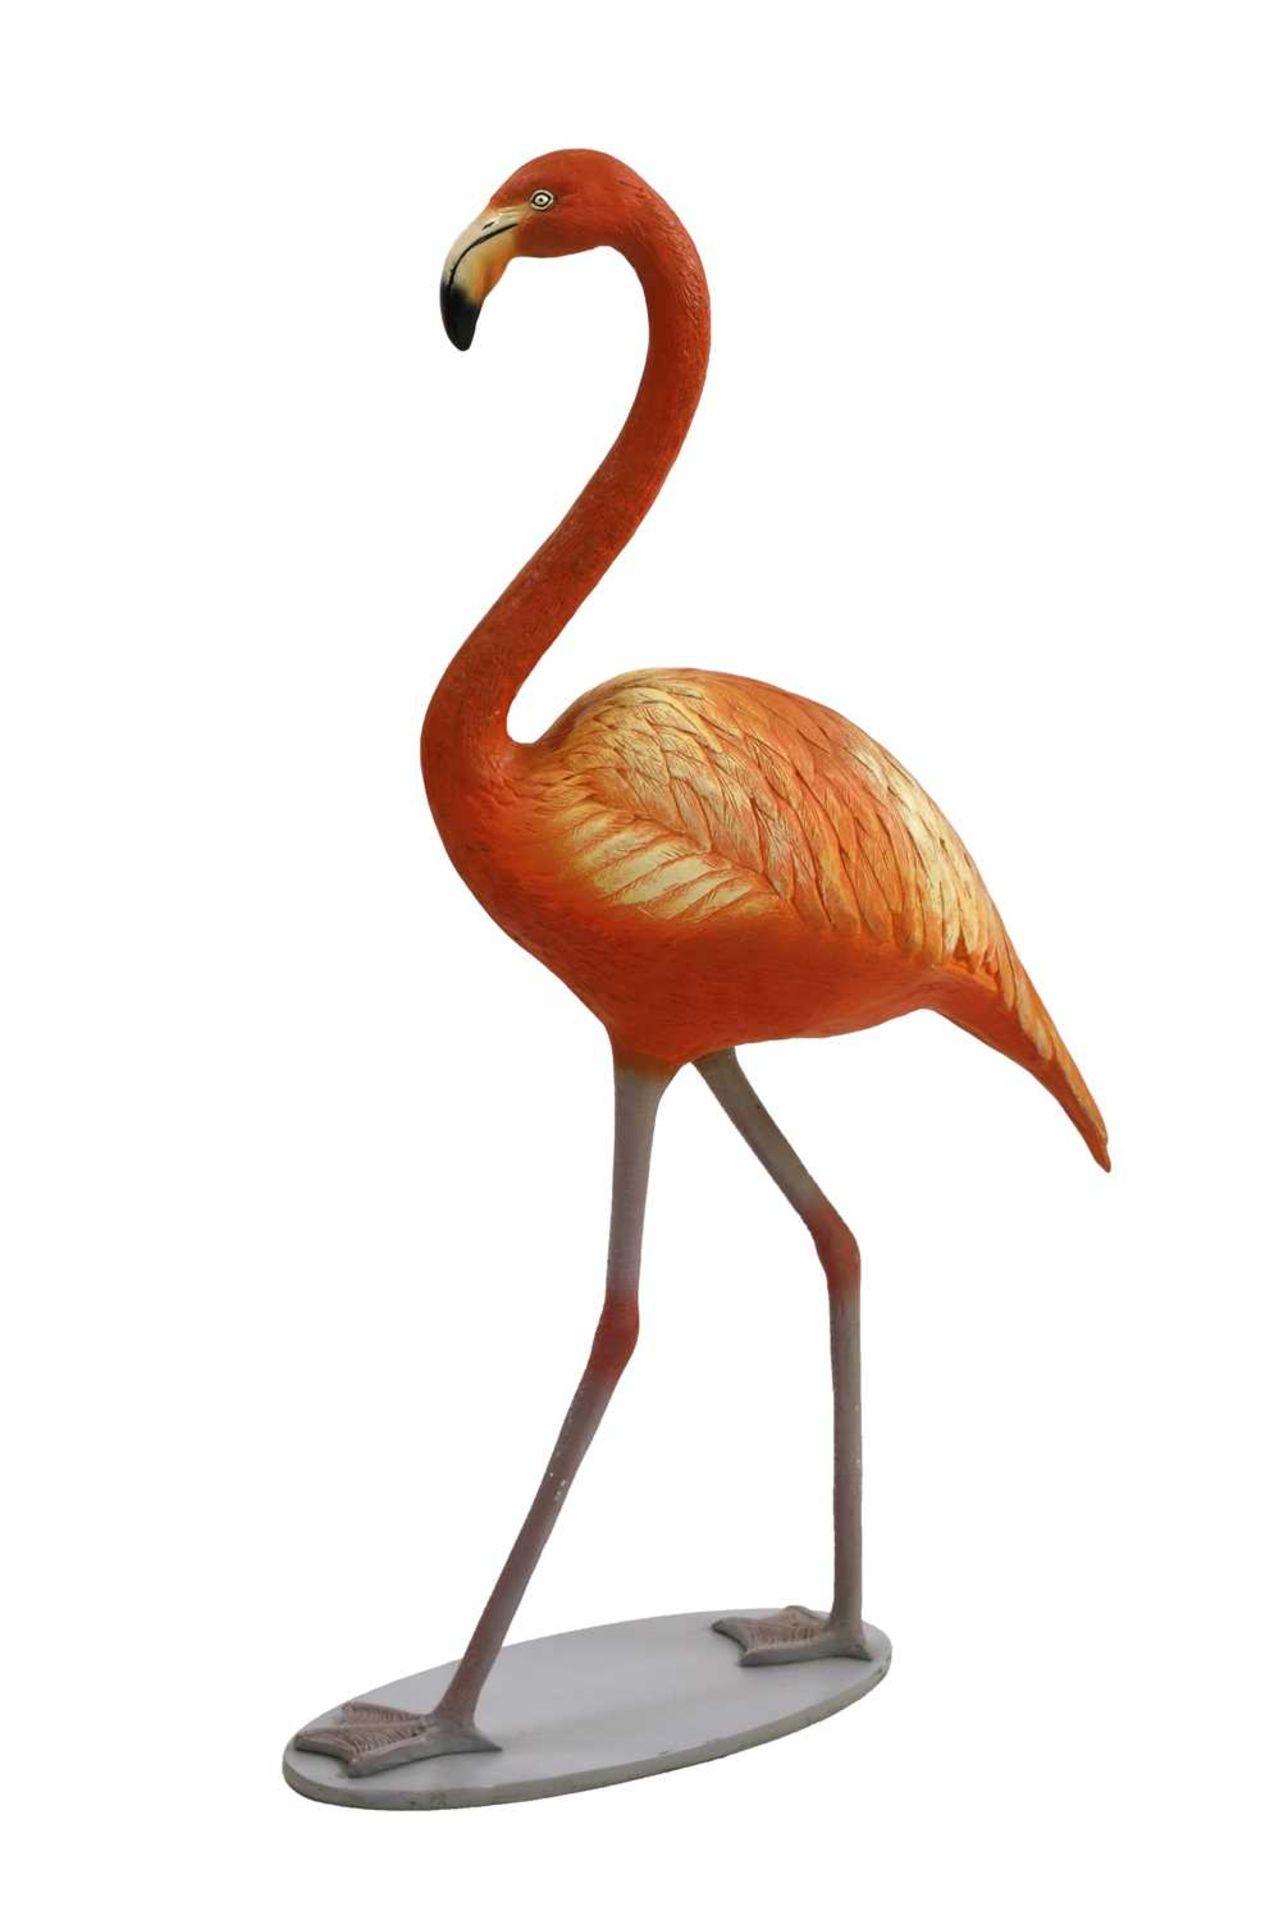 A painted model of a flamingo,